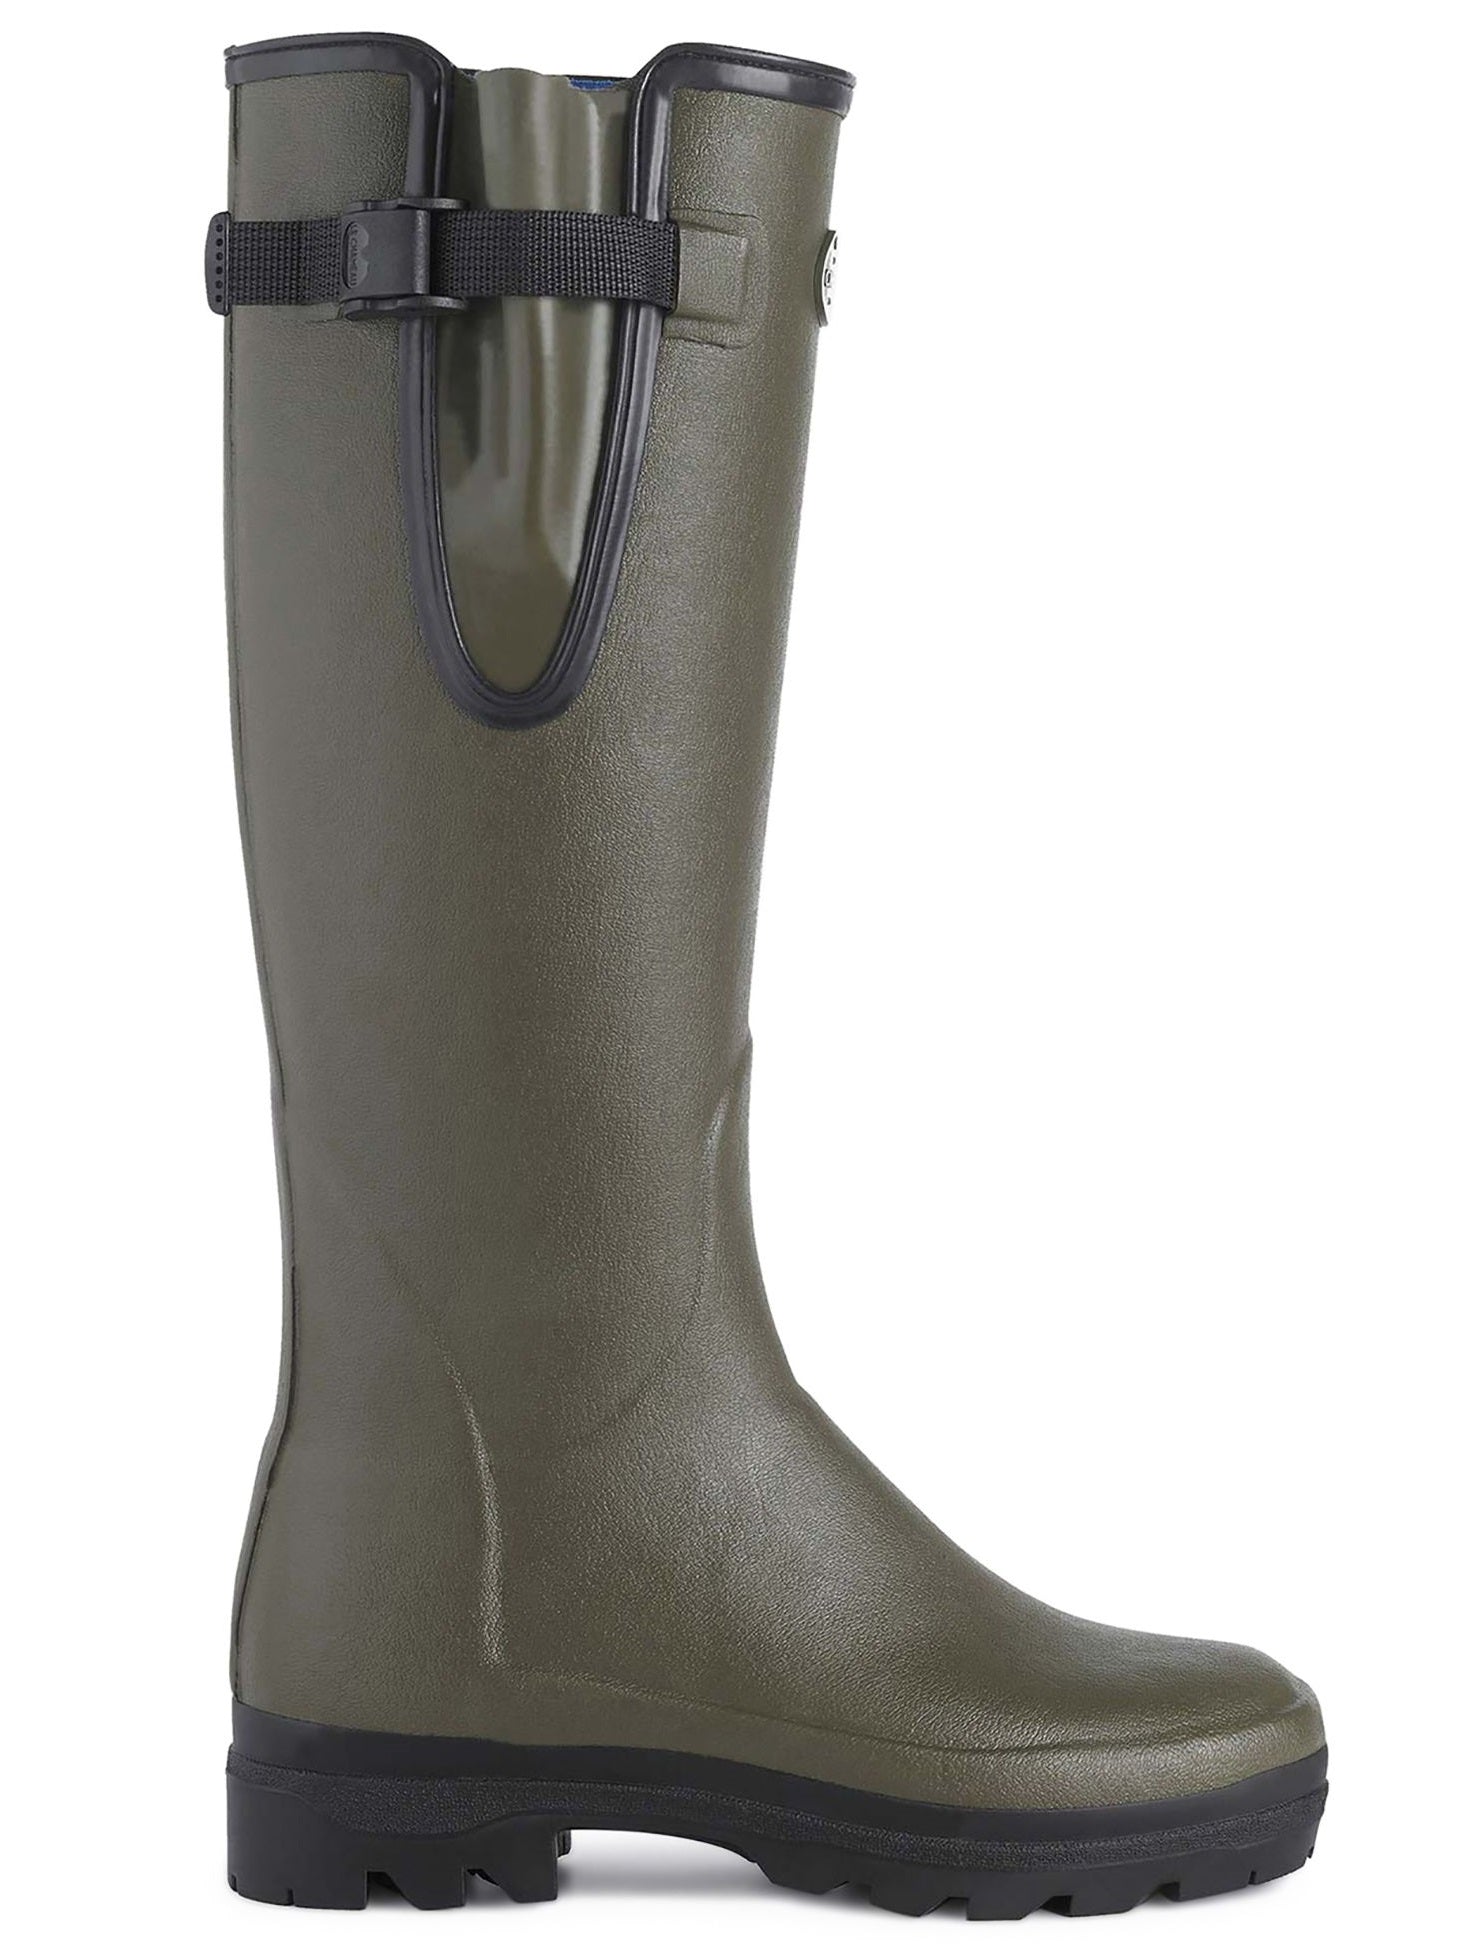 LE CHAMEAU Vierzonord Boots - Ladies Neoprene Lined - Dark Green